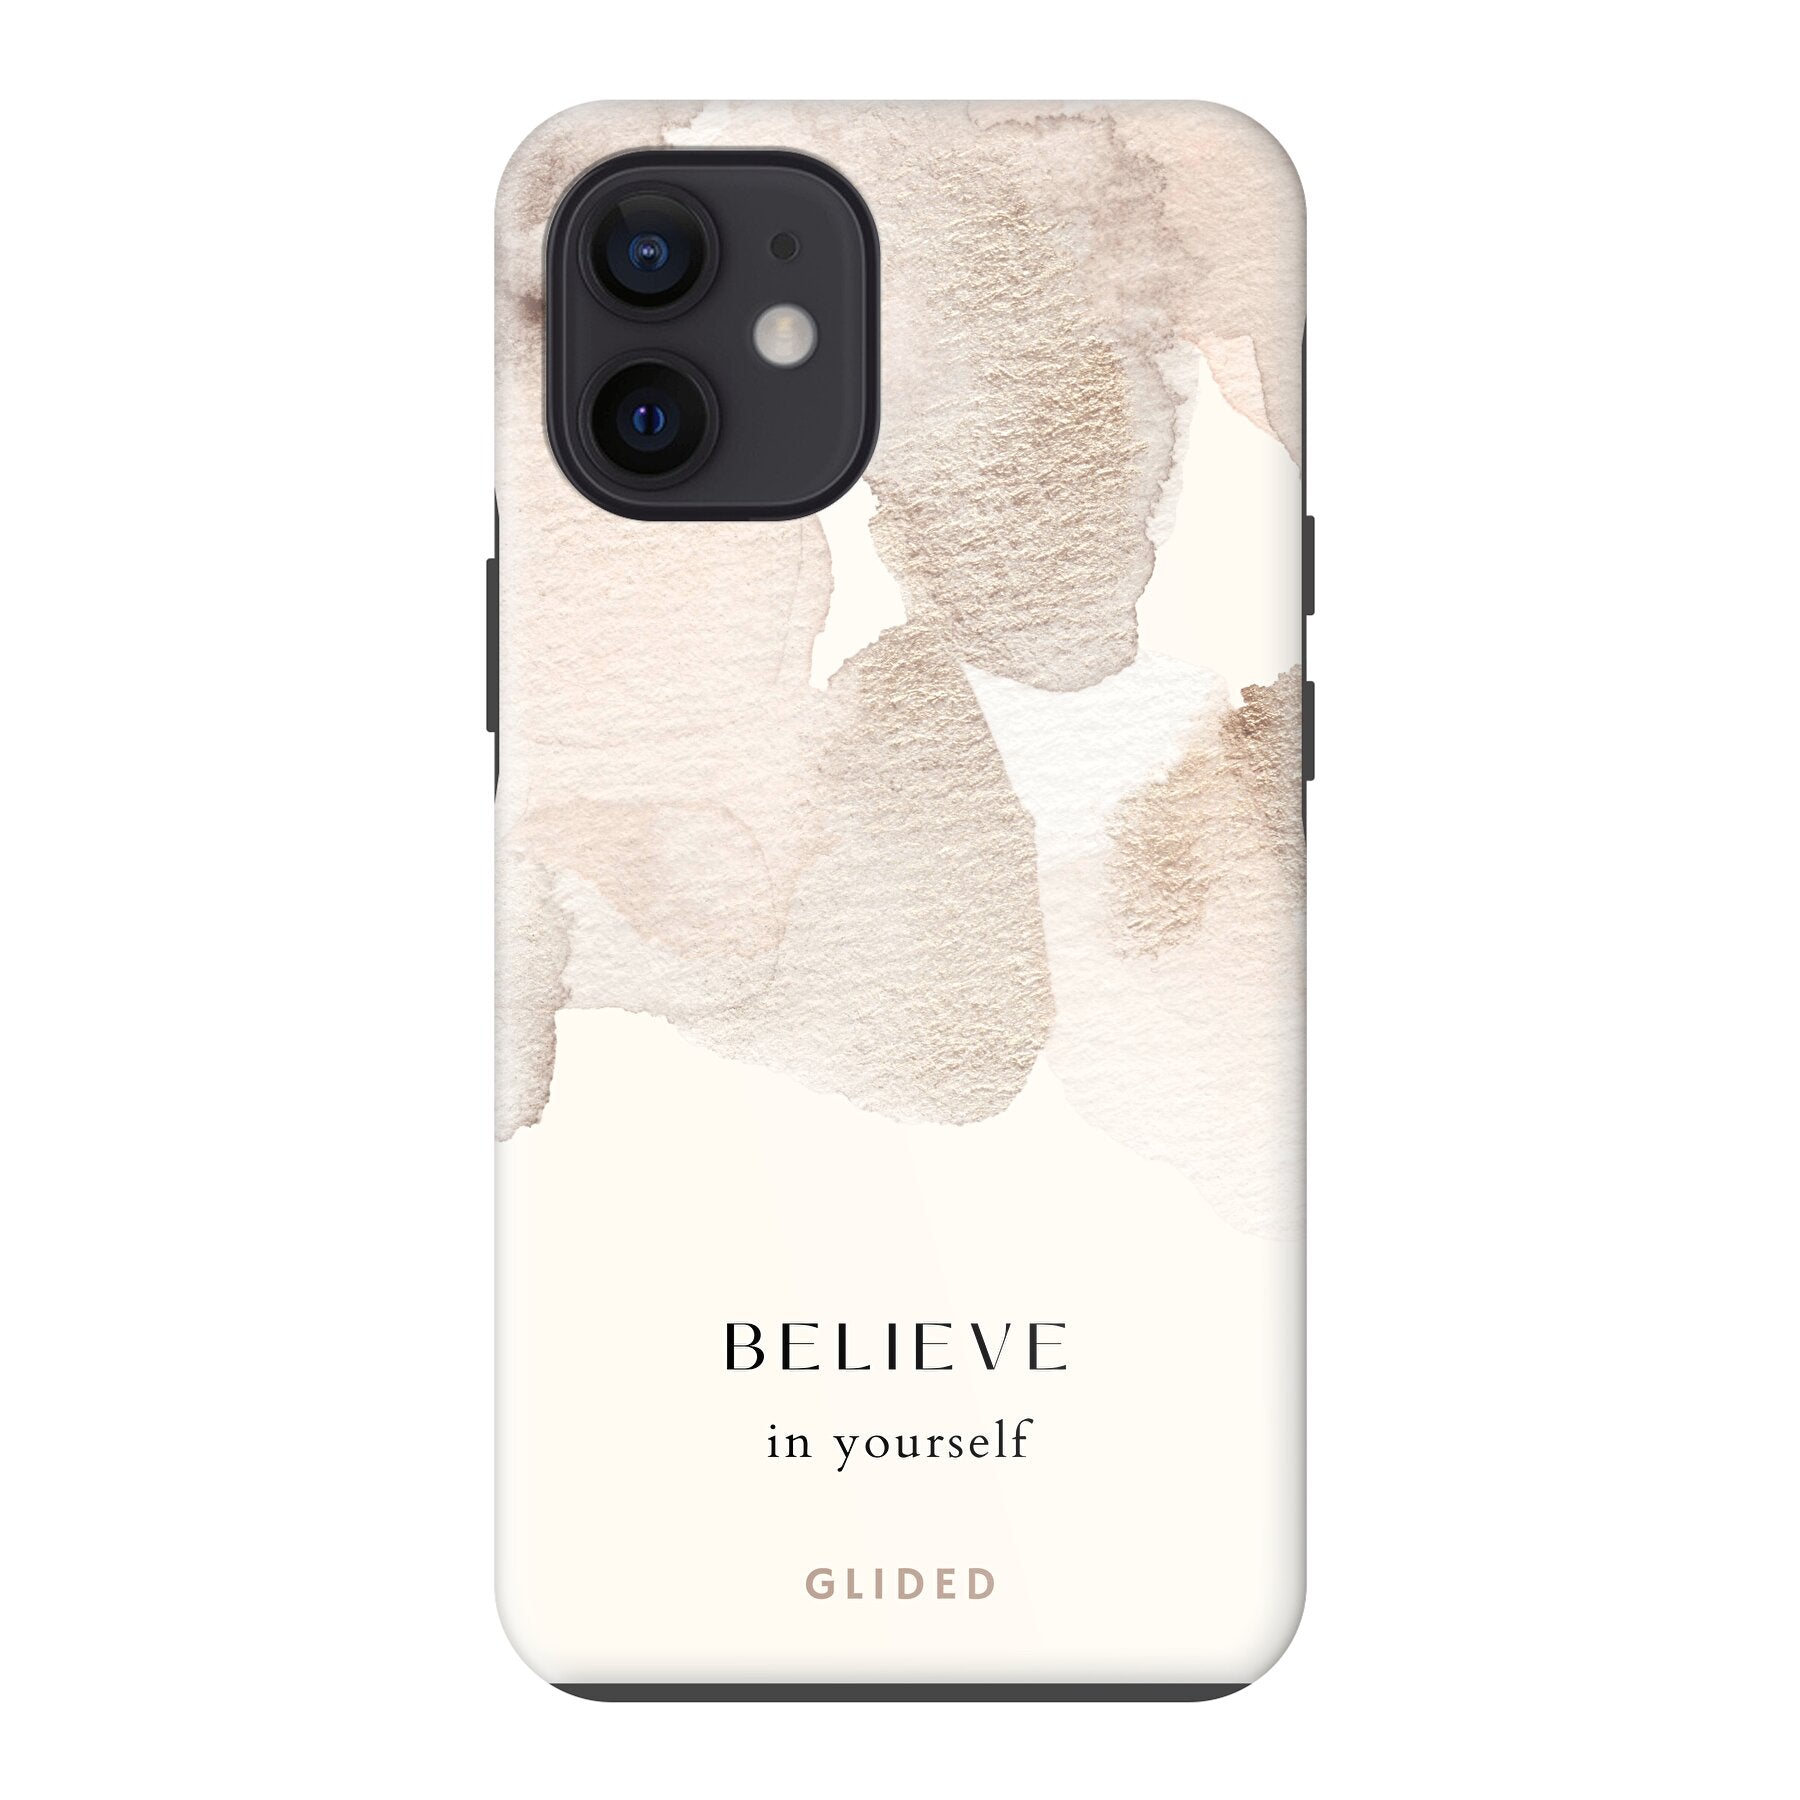 Believe in yourself - iPhone 12 mini Handyhülle MagSafe Tough case